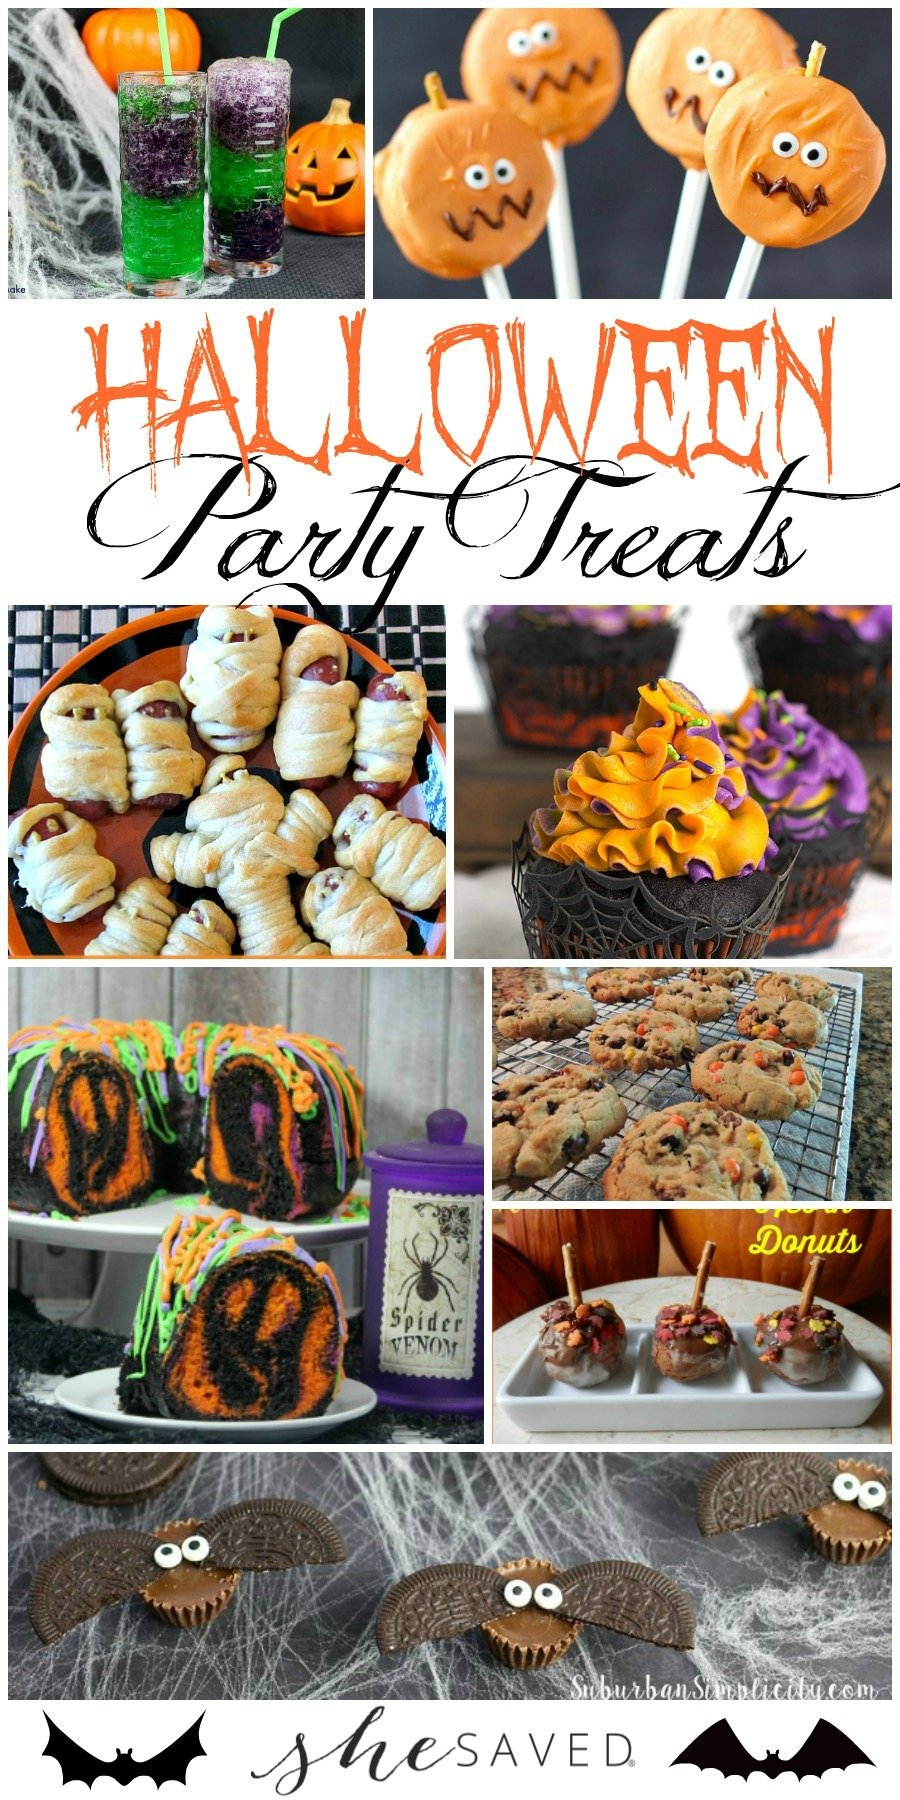 Check out this awesome round up of Halloween party treats that will be a hit at your spooky party!